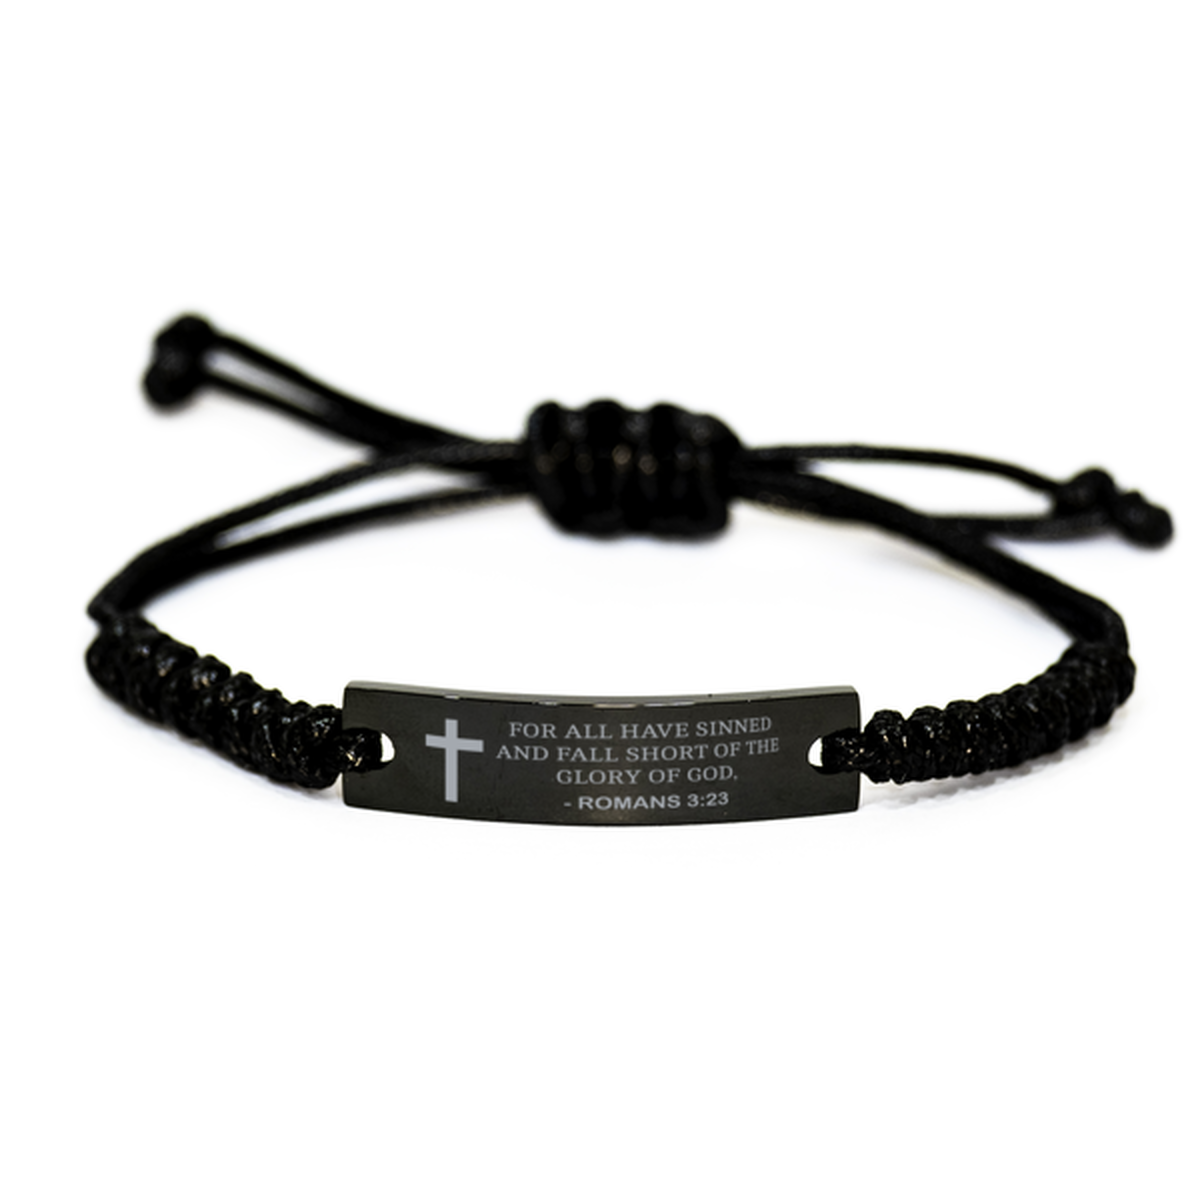 Christian Bracelets For Men Women, Bible Verse Rope Bracelet, Romans 3:23 For All Have Sinned And Fall Short Of The Glory, Encouraging Gifts For Guys